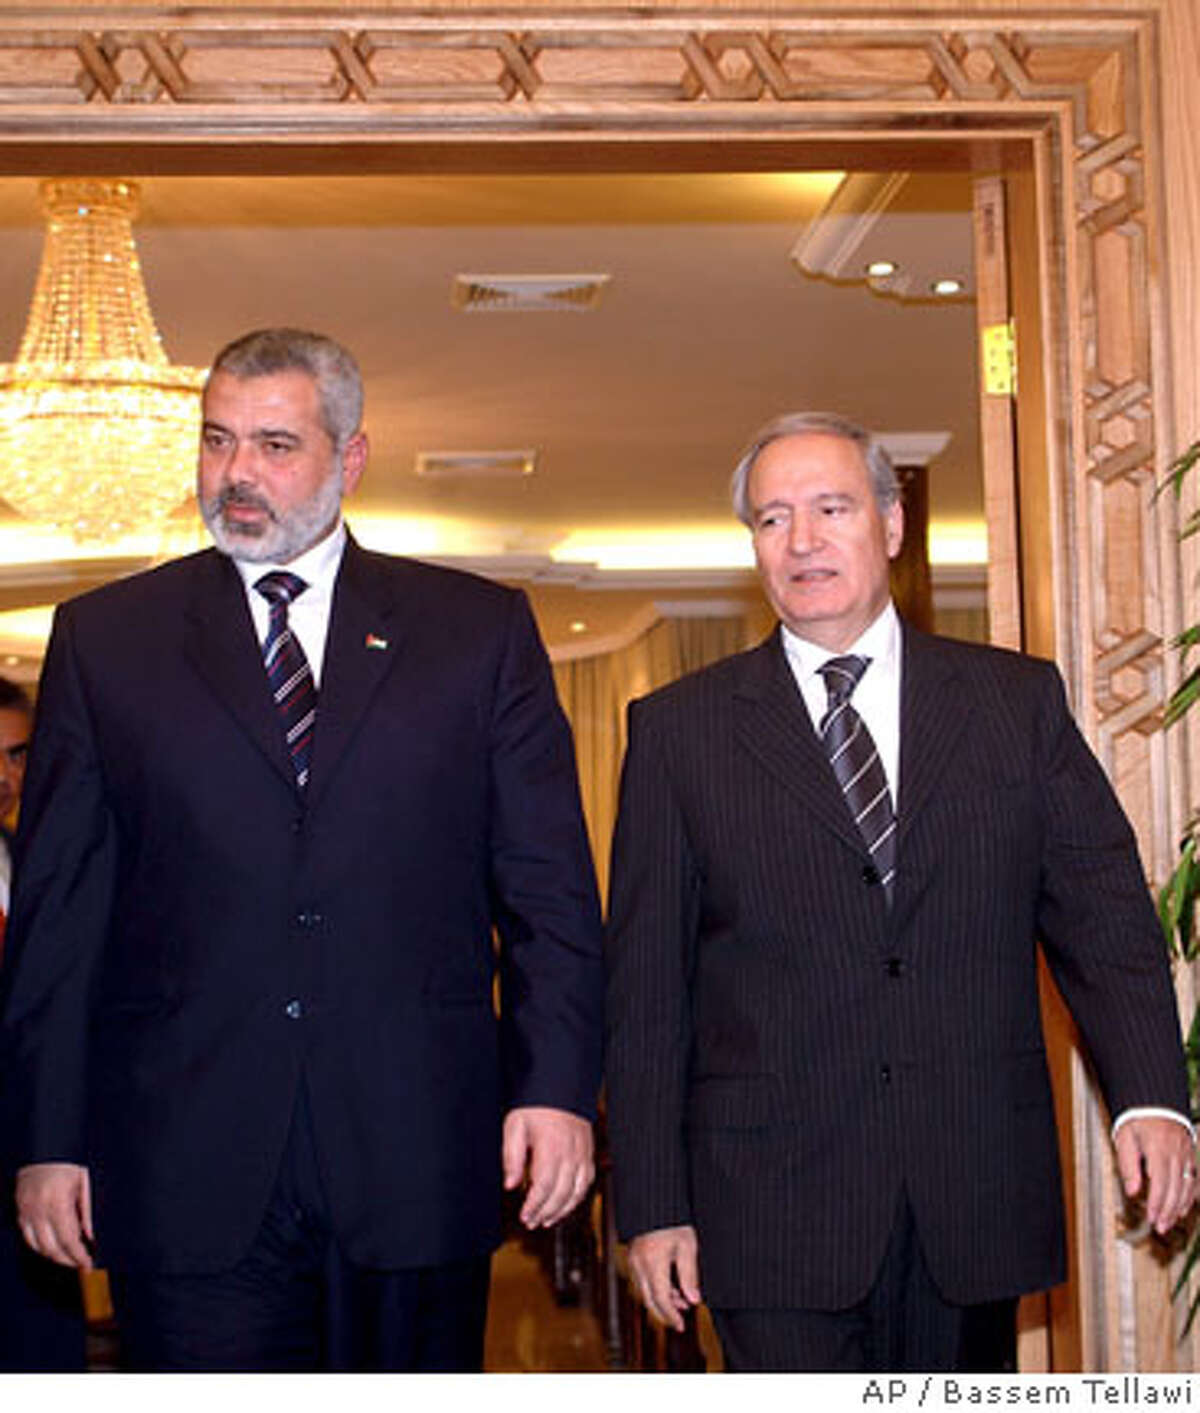 Syrian Vice-President Farouk al-Sharaa, right, meets Palestinian Prime Minister Ismail Haniyeh in Damascus, Monday, Dec. 4, 2006. Haniyeh arrived Sunday for talks with Syrian officials and the leaders of Damascus-based Palestinian factions on faltering efforts toward forming a Palestinian national unity government.